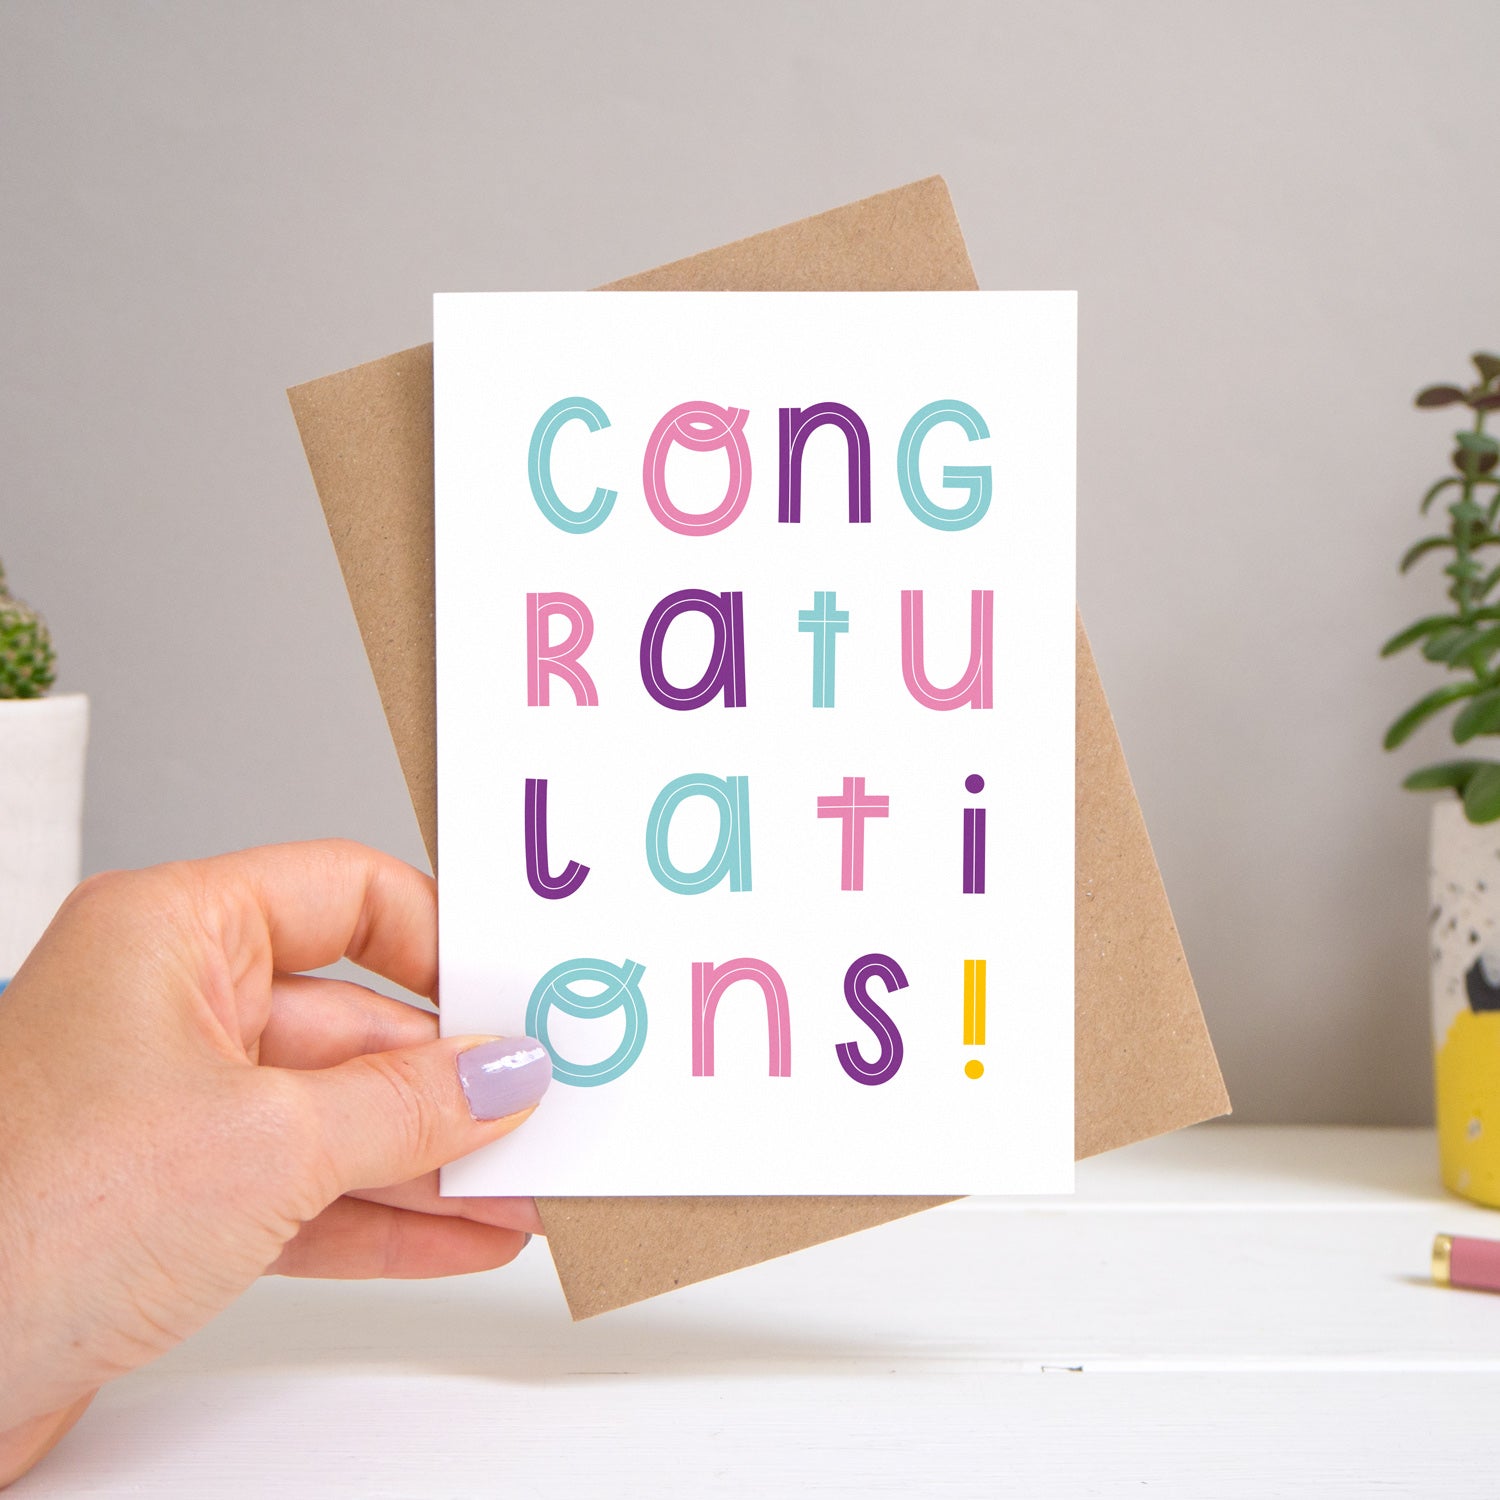 A congratulations card held over a warm grey and white background with potted plants peeping the sides. Behind the card is a kraft brown envelope that comes with the card. The text on this version of the card is in varying tones of pink, purple and blue.